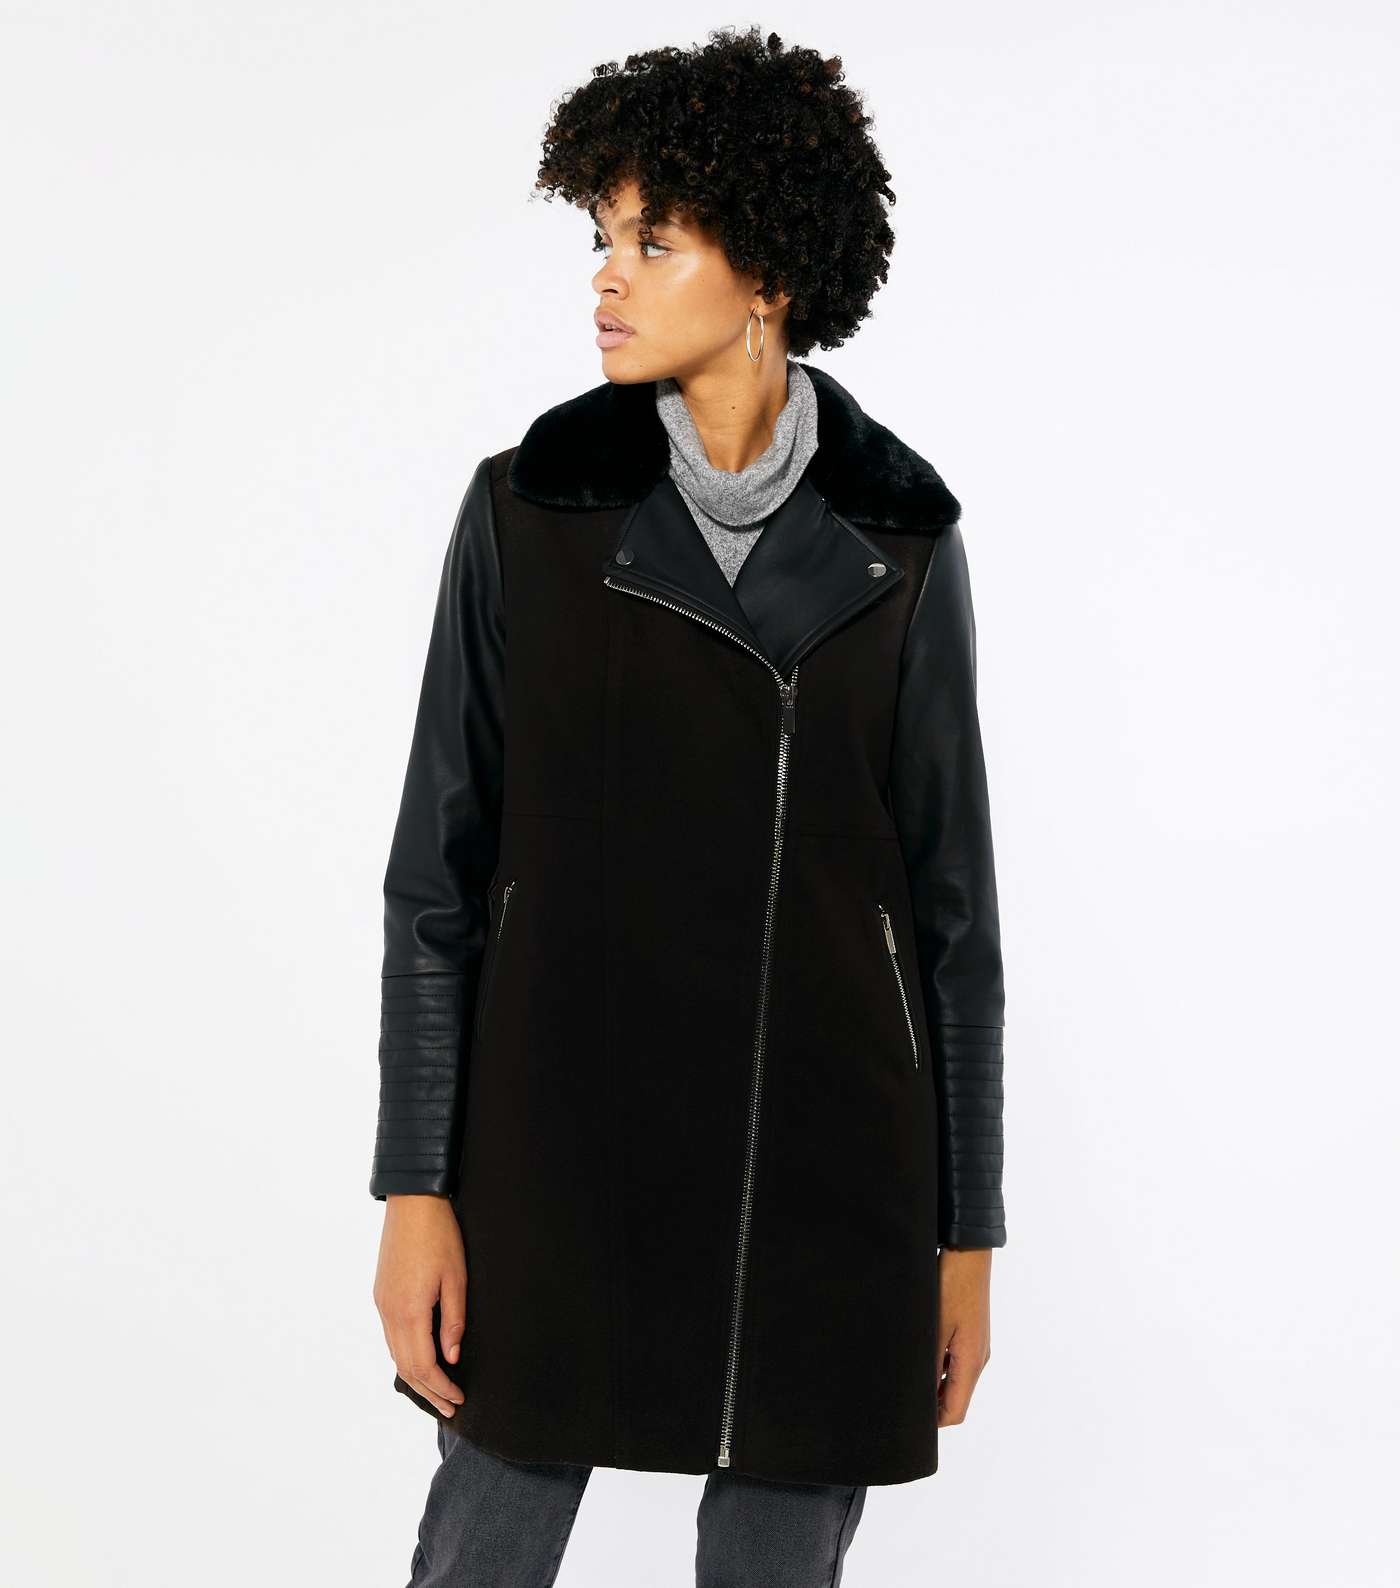 Black Leather-Look Sleeve Collared Coat Image 2